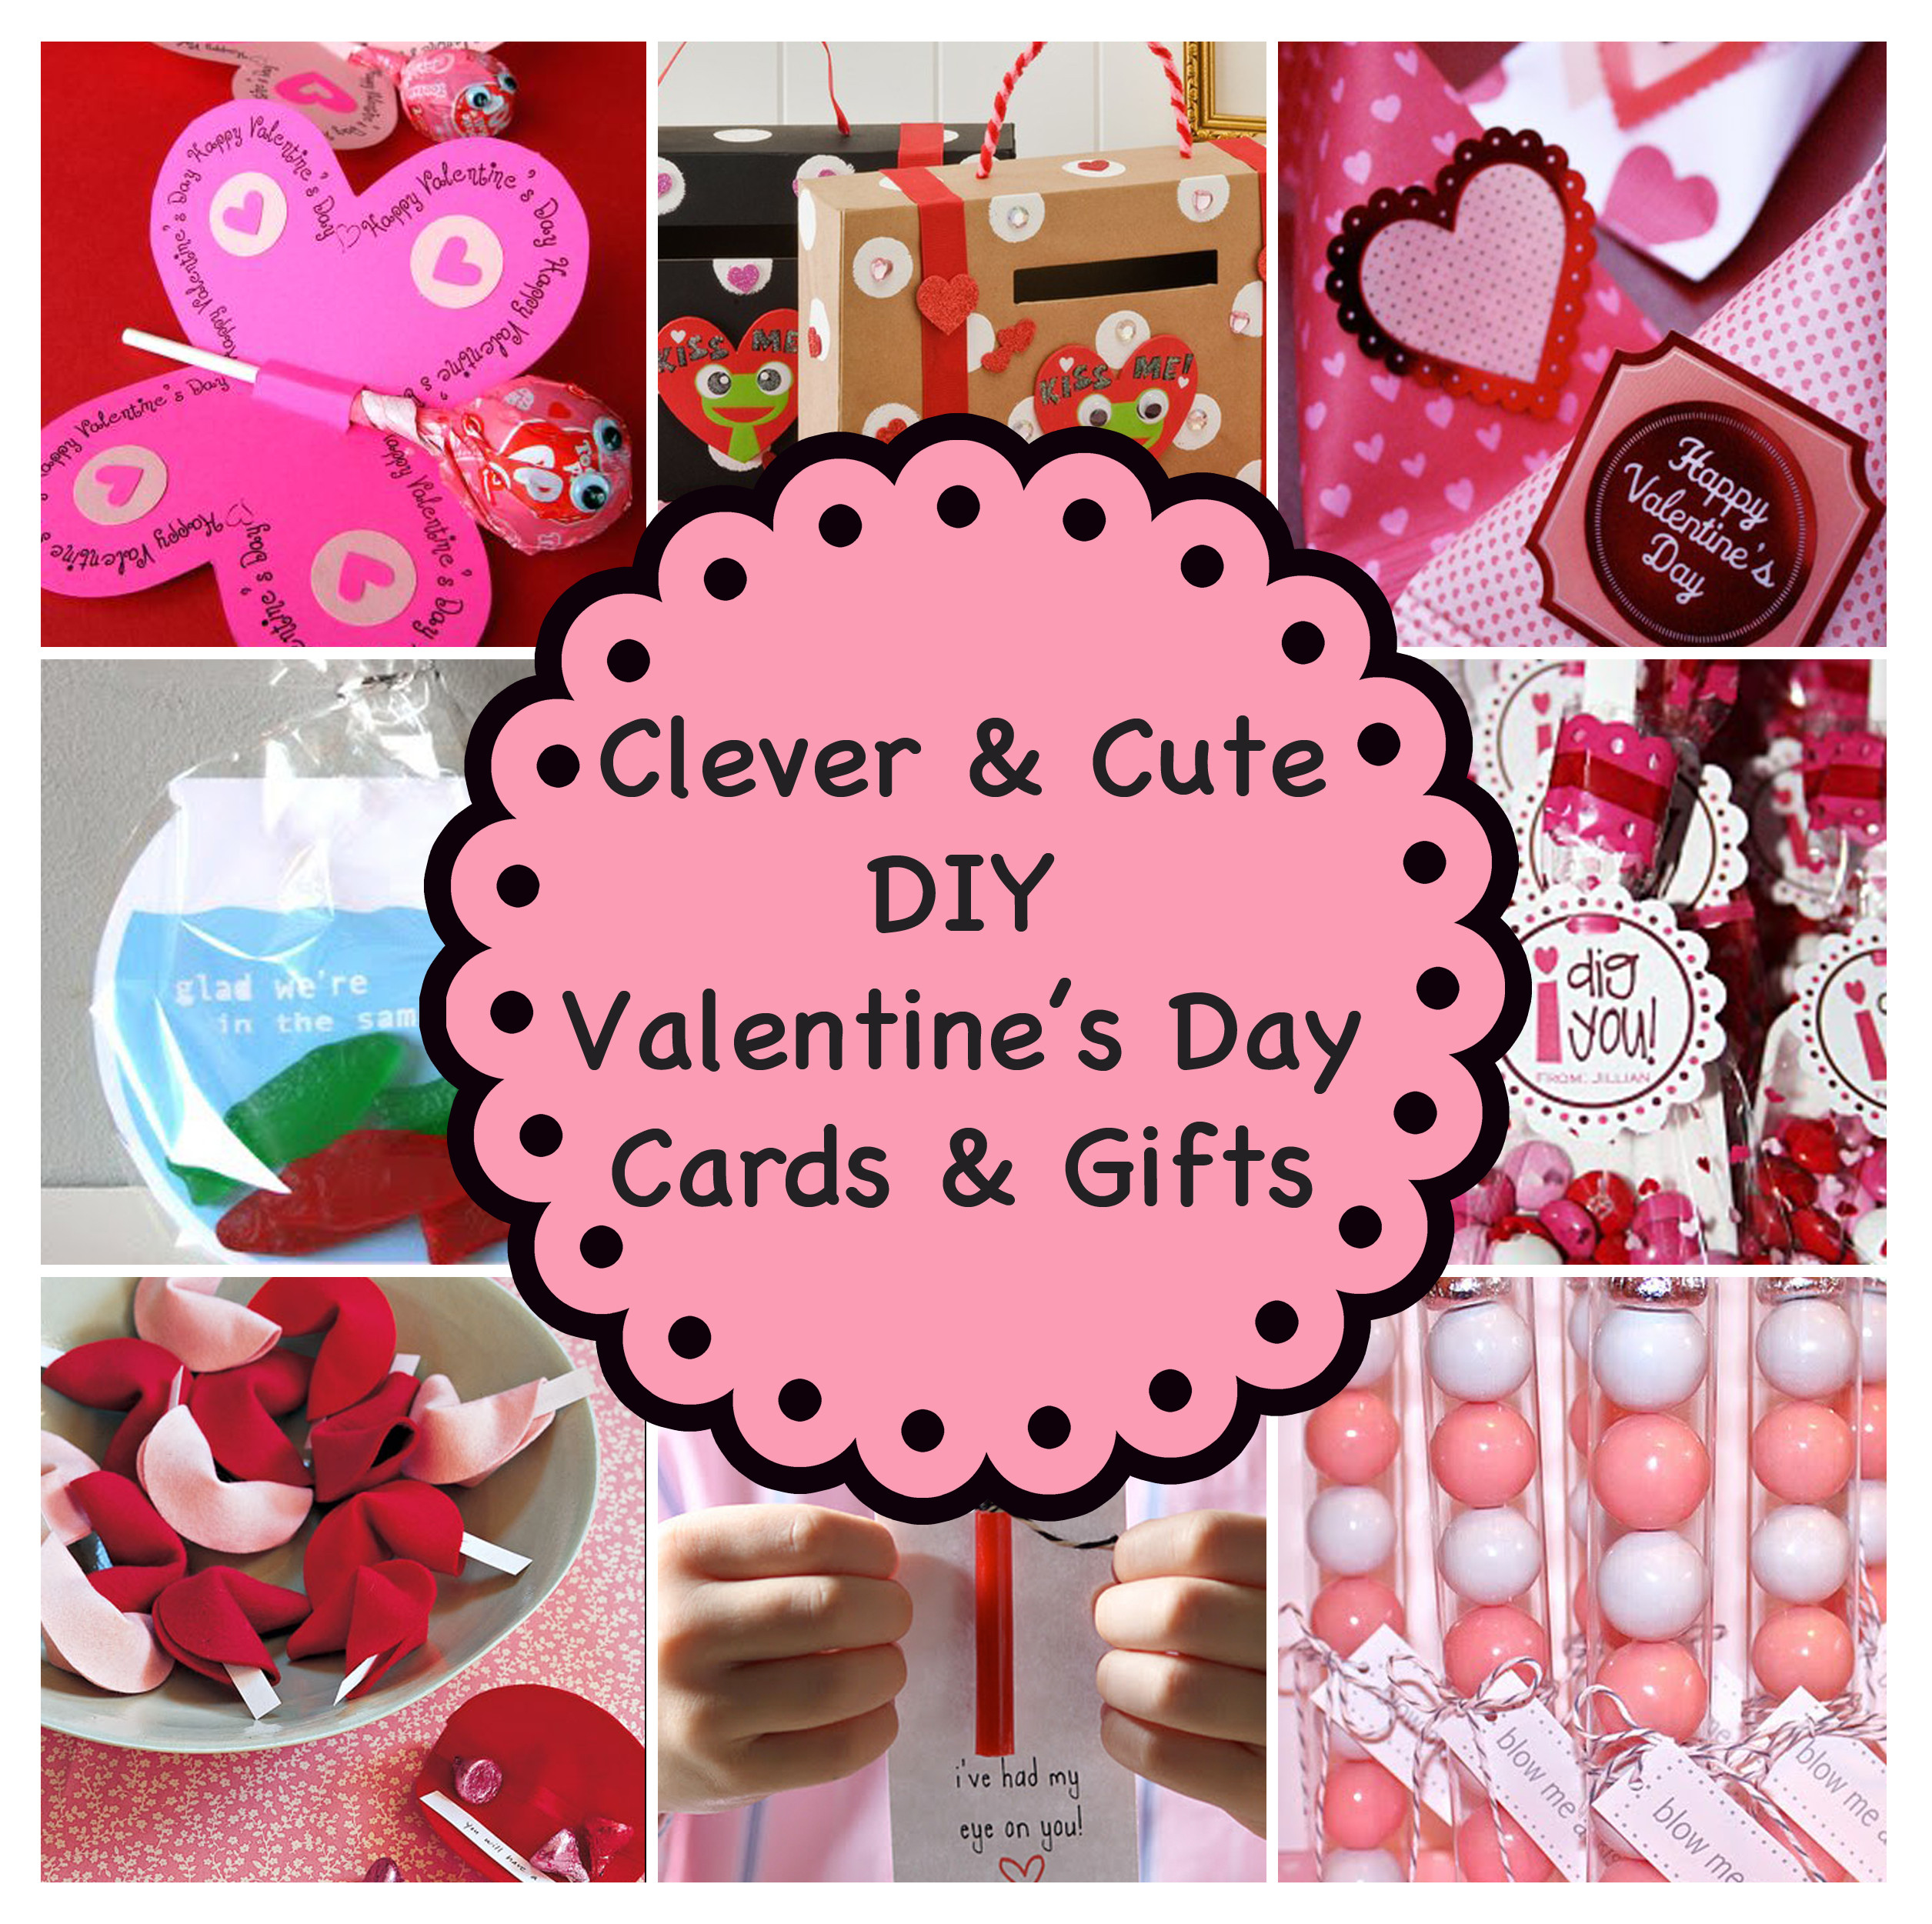 Valentines Day Diy
 Clever and Cute DIY Valentine’s Day Cards & Gifts